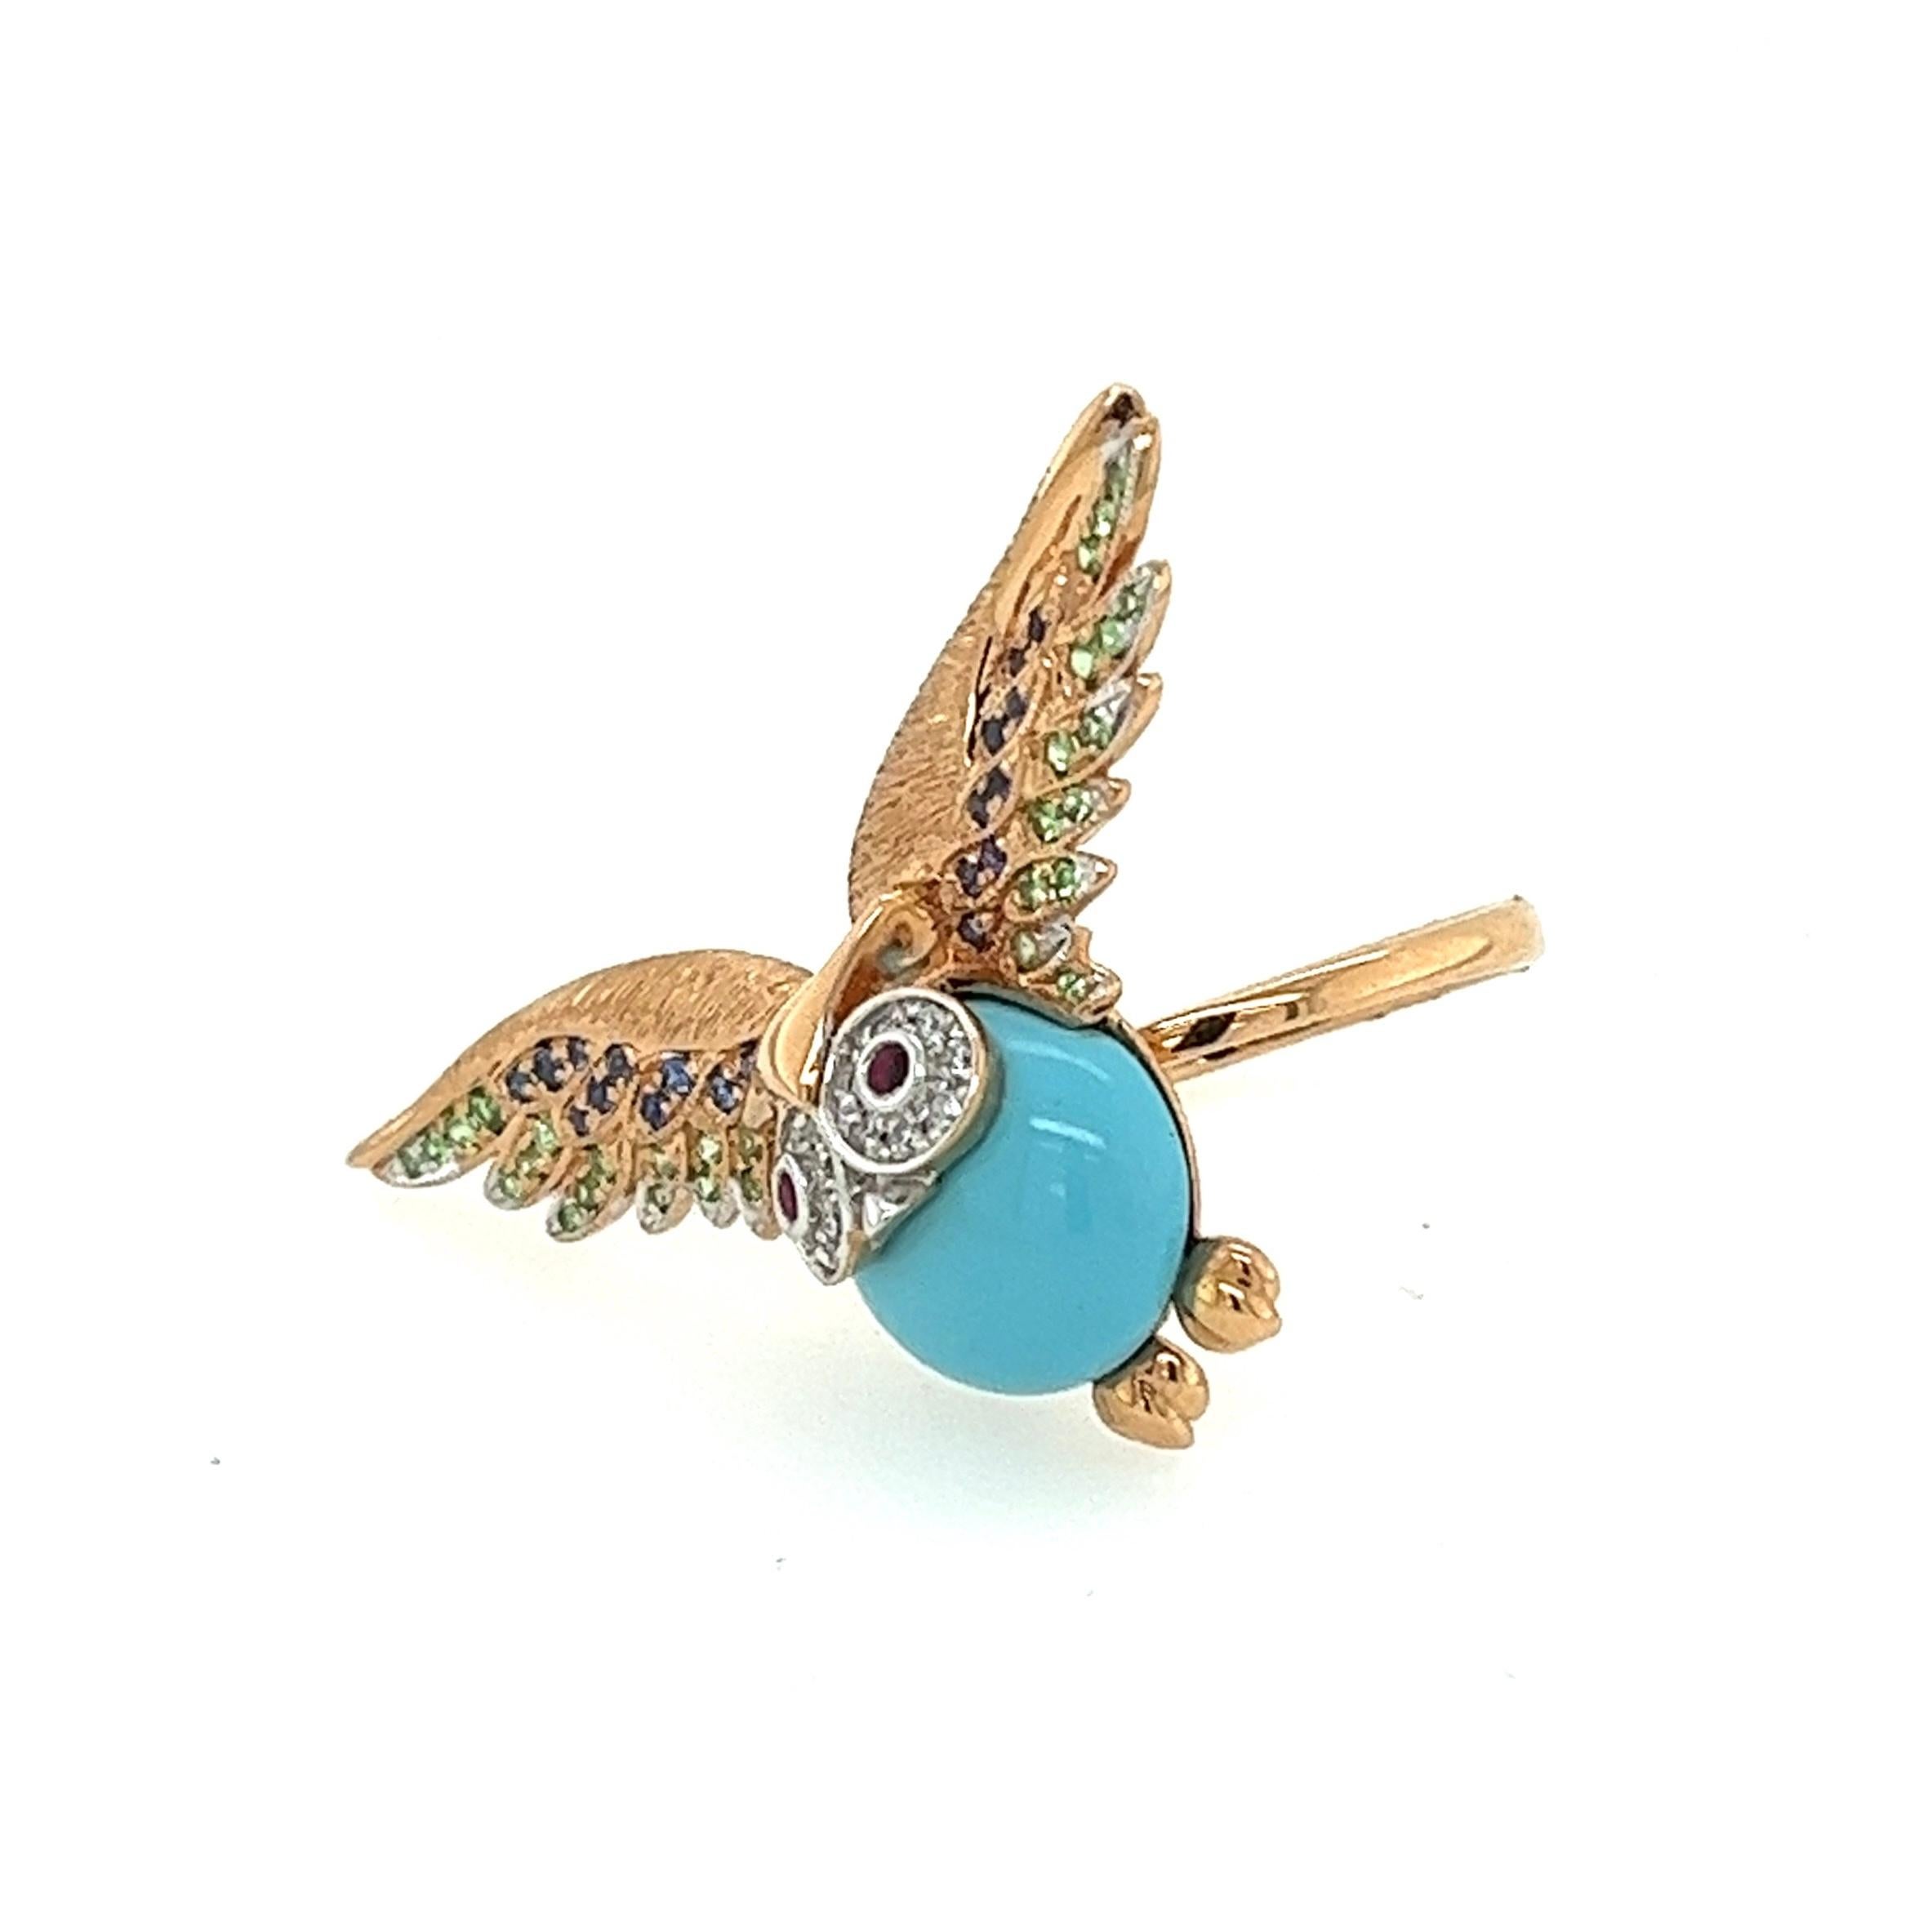 18K Gemstone Owl Turquoise Ring with Sapphires & Rubies

21 Blue Sapphires - 0.10 CT
14 Diamonds - 0.06 CT
33 Green Garnets - 0.14 CT
2 Rubies - 0.03 CT
1 Turquoise - 3.50 CT

Introducing a mesmerizing 18K Gemstone Owl Turquoise Ring adorned with